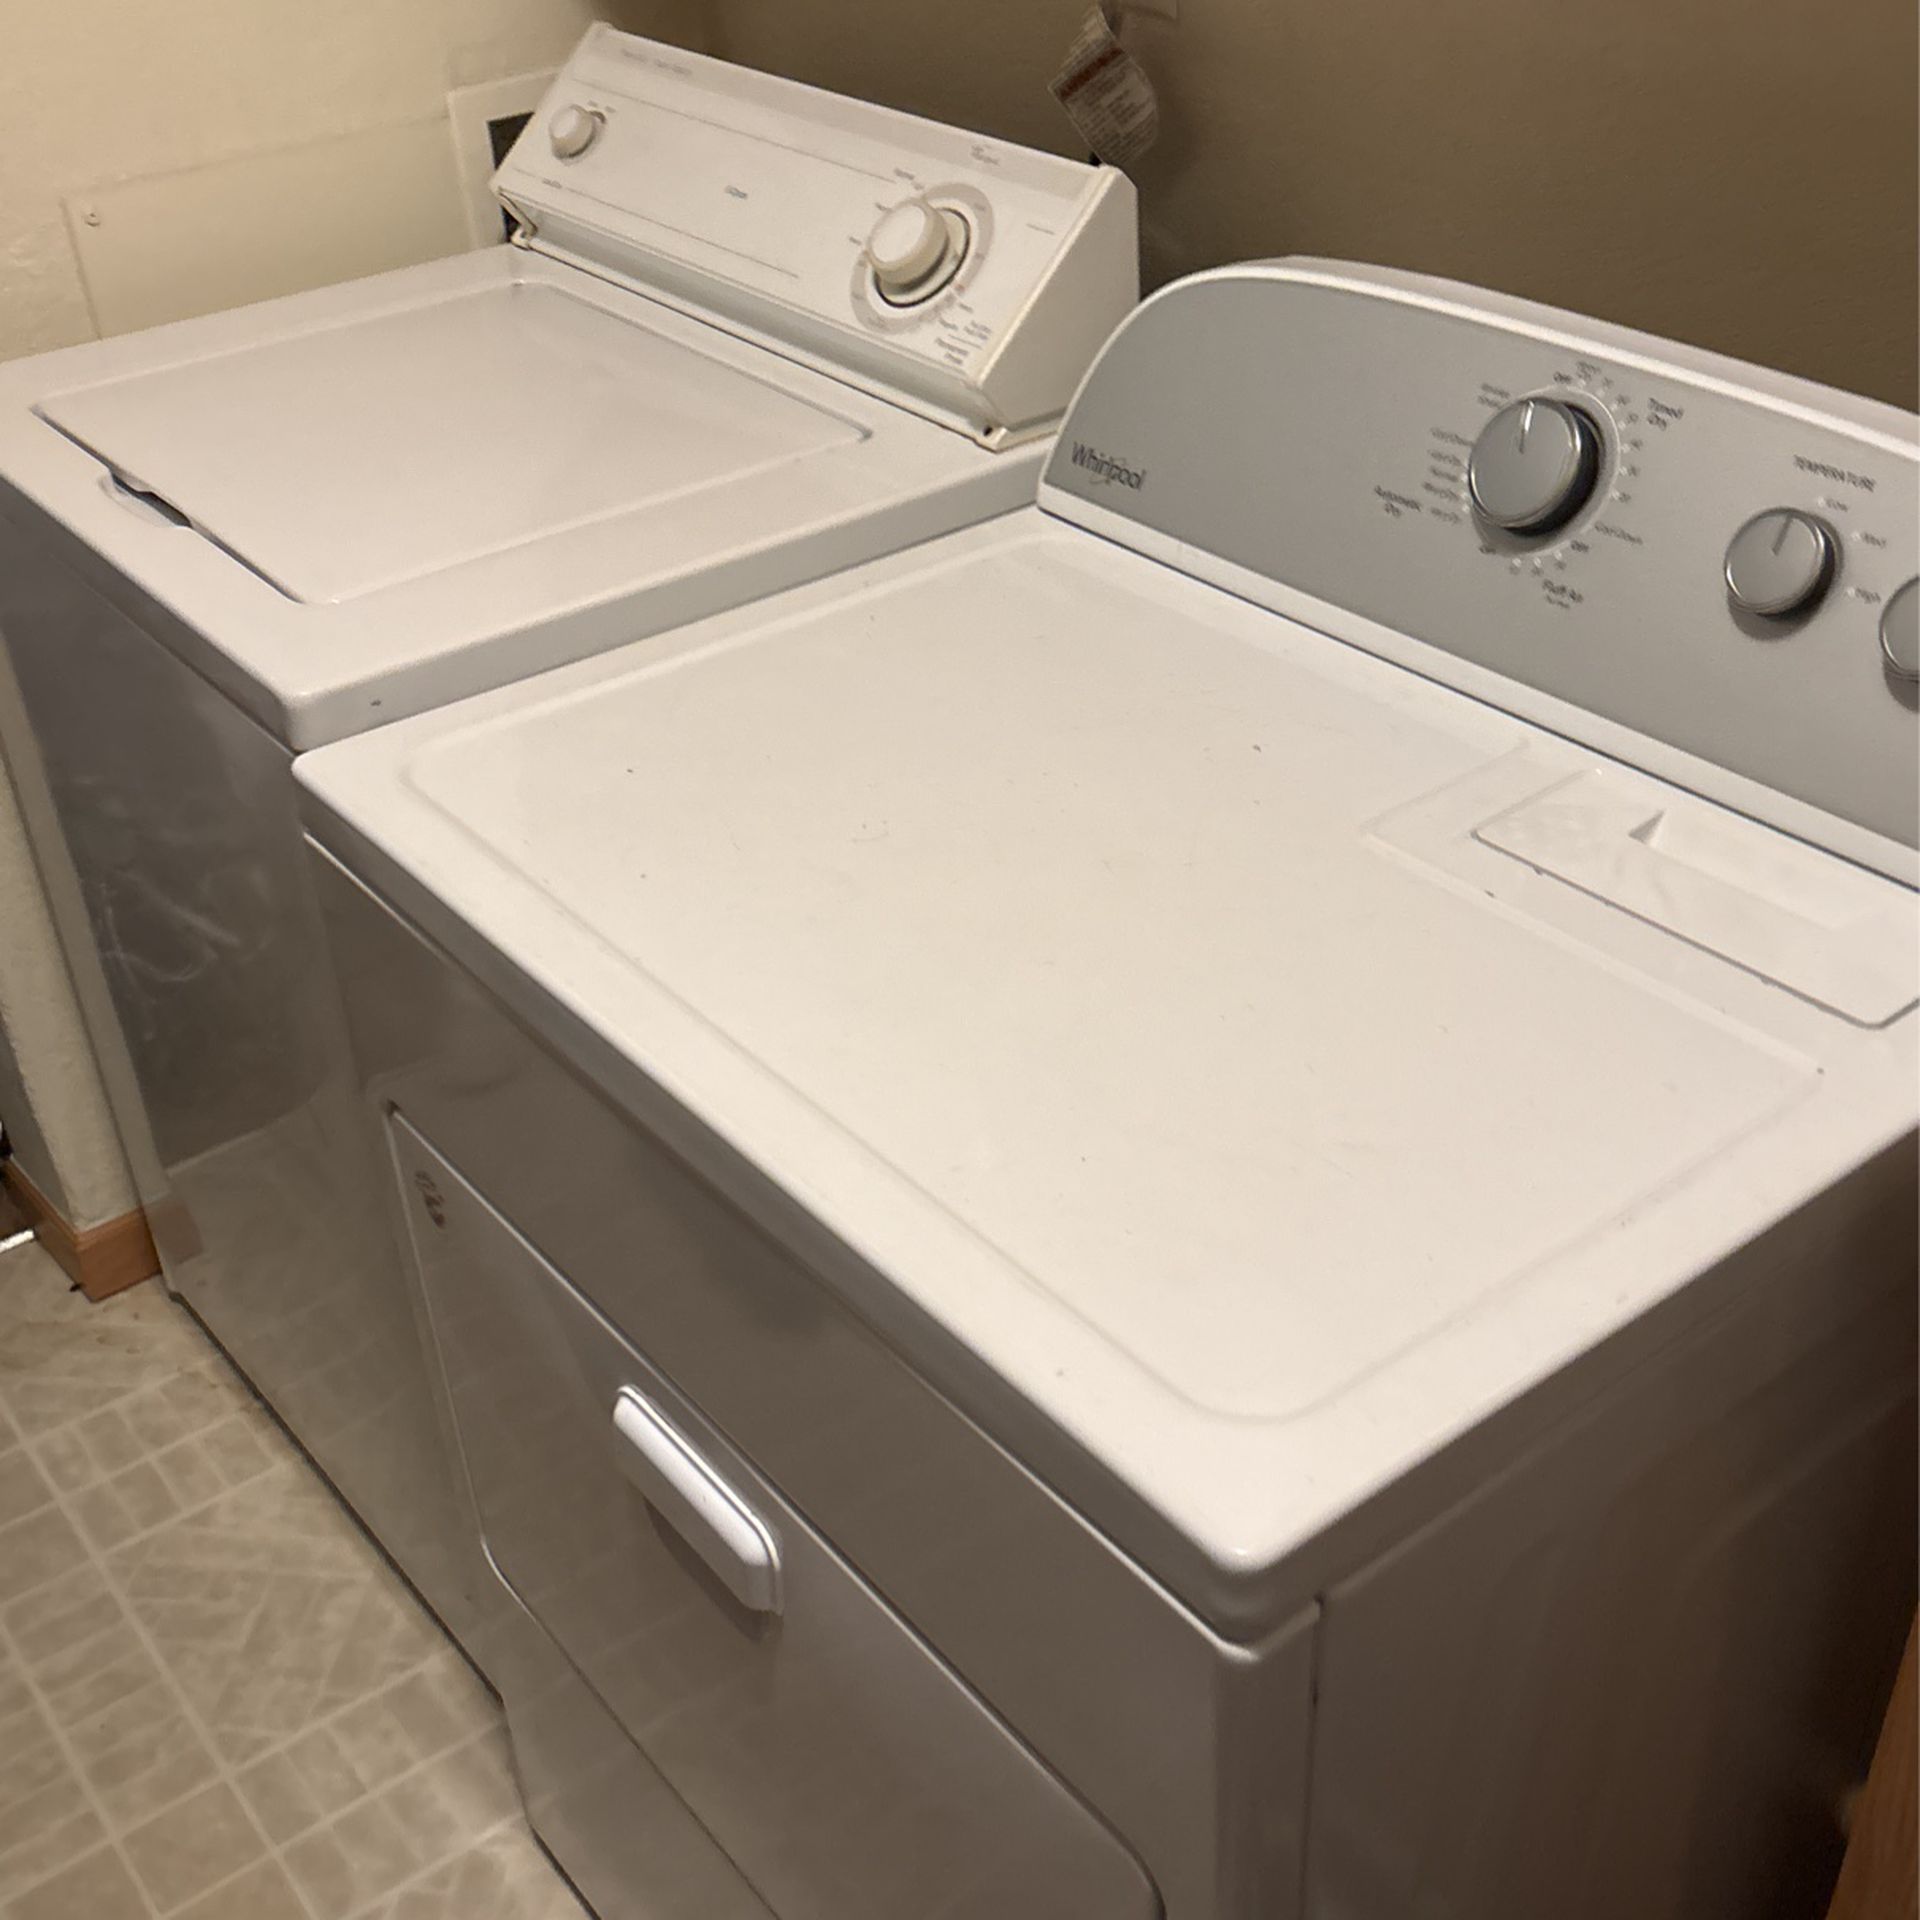 Whirlpool Washer For Parts